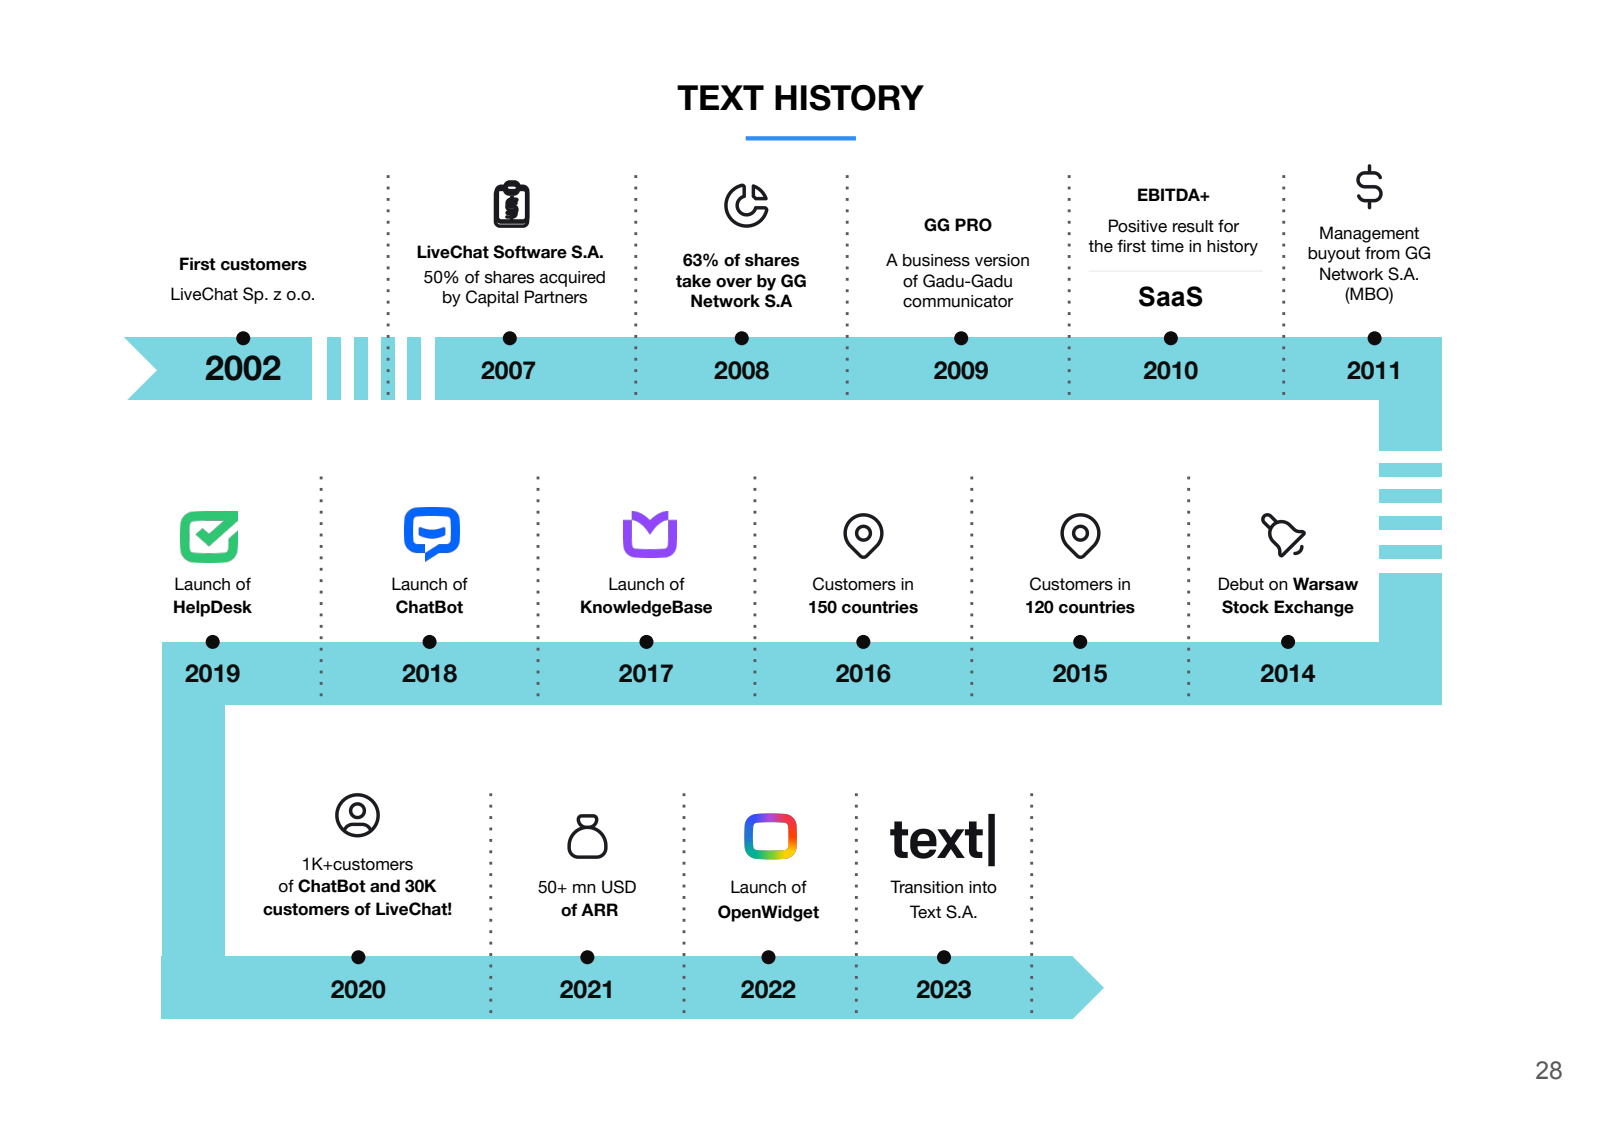 TEXT HISTORY 

First